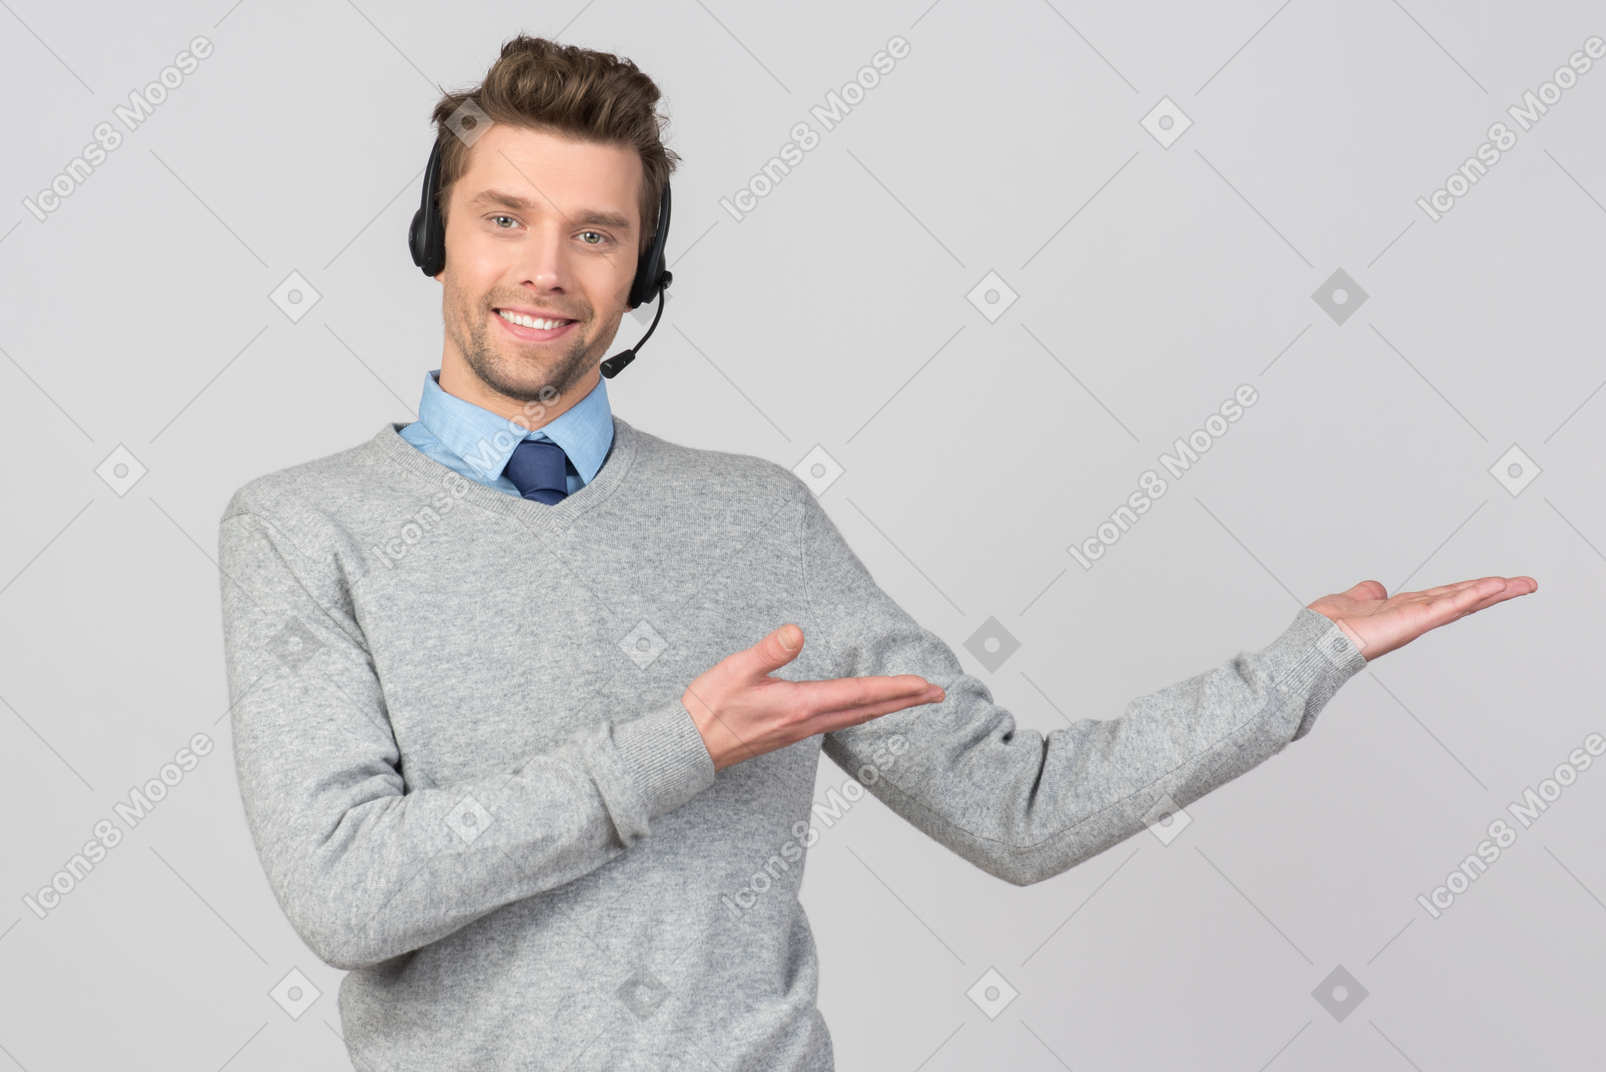 Call center agent showing a way to go with hands